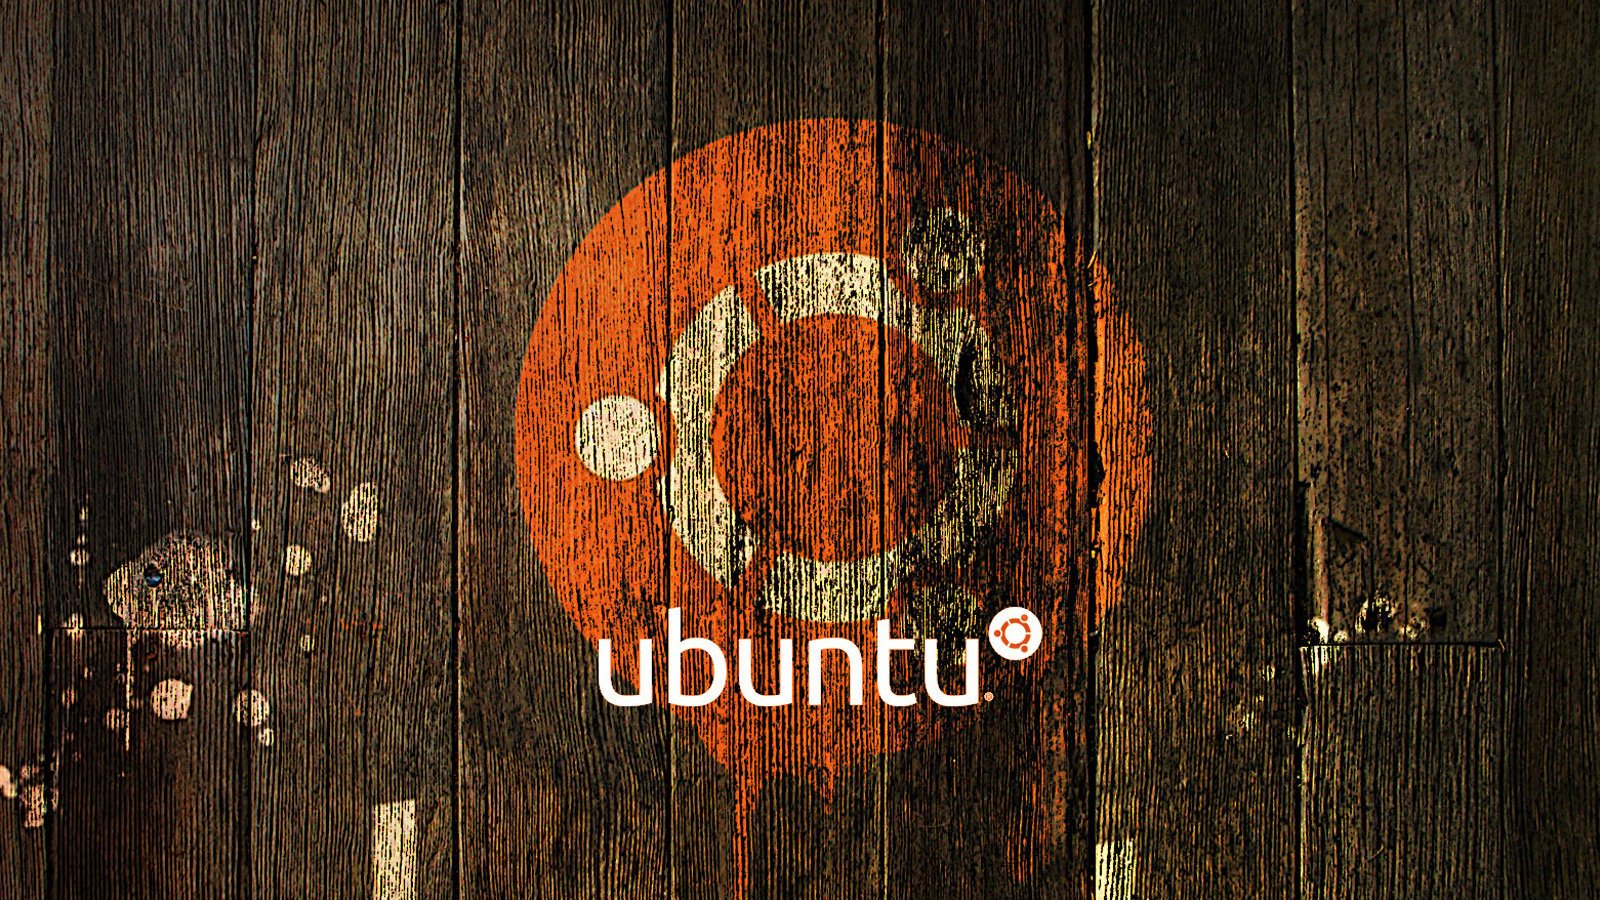 Almost 40% of Ubuntu users vulnerable to new privilege elevation flaws – Source: www.bleepingcomputer.com